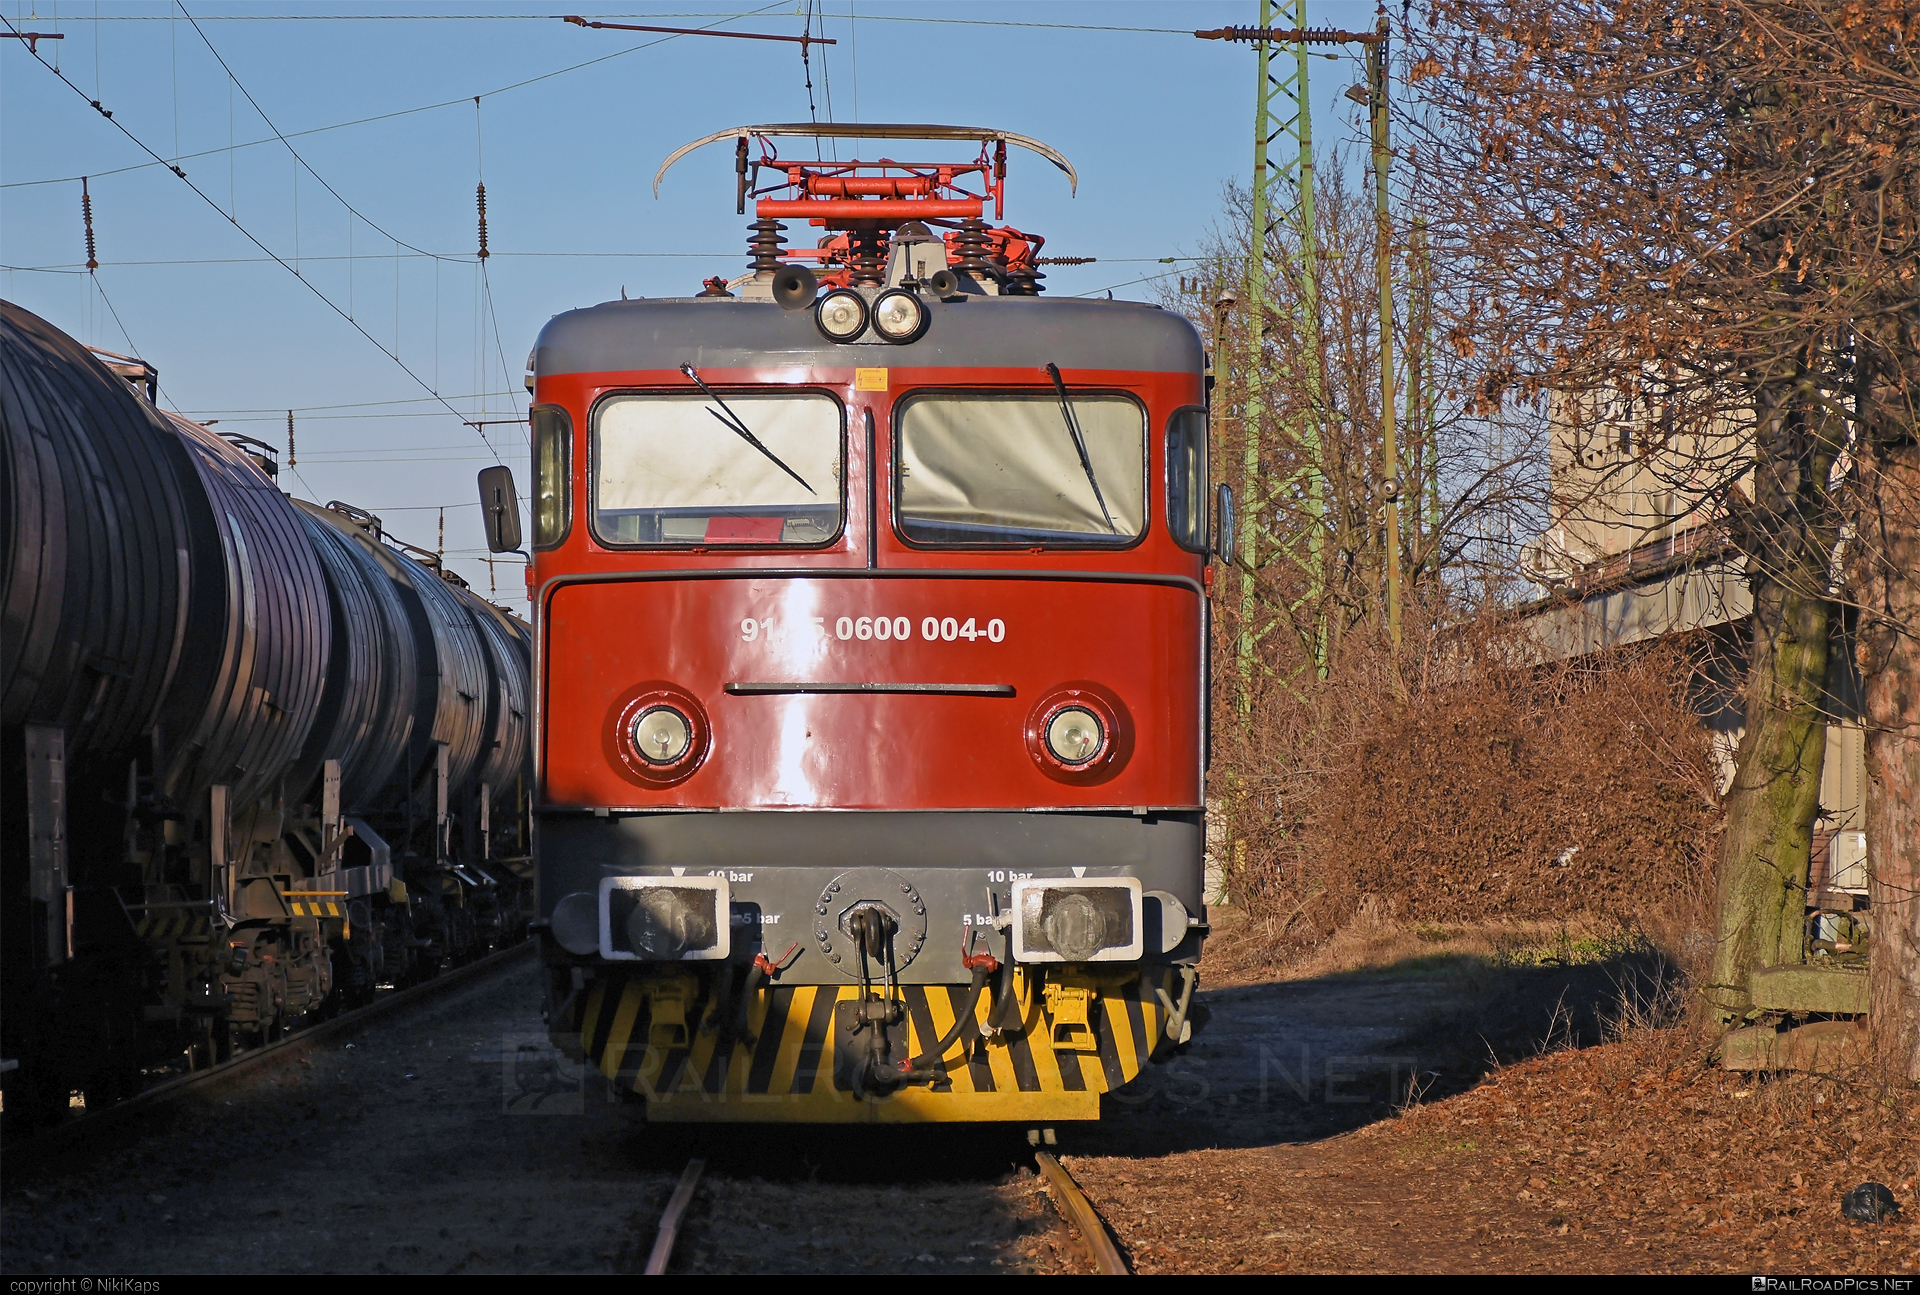 Electroputere LE 5100 - 600 004-0 operated by FOXrail Zrt. #electroputere #electroputerecraiova #electroputerele5100 #foxrail #le5100